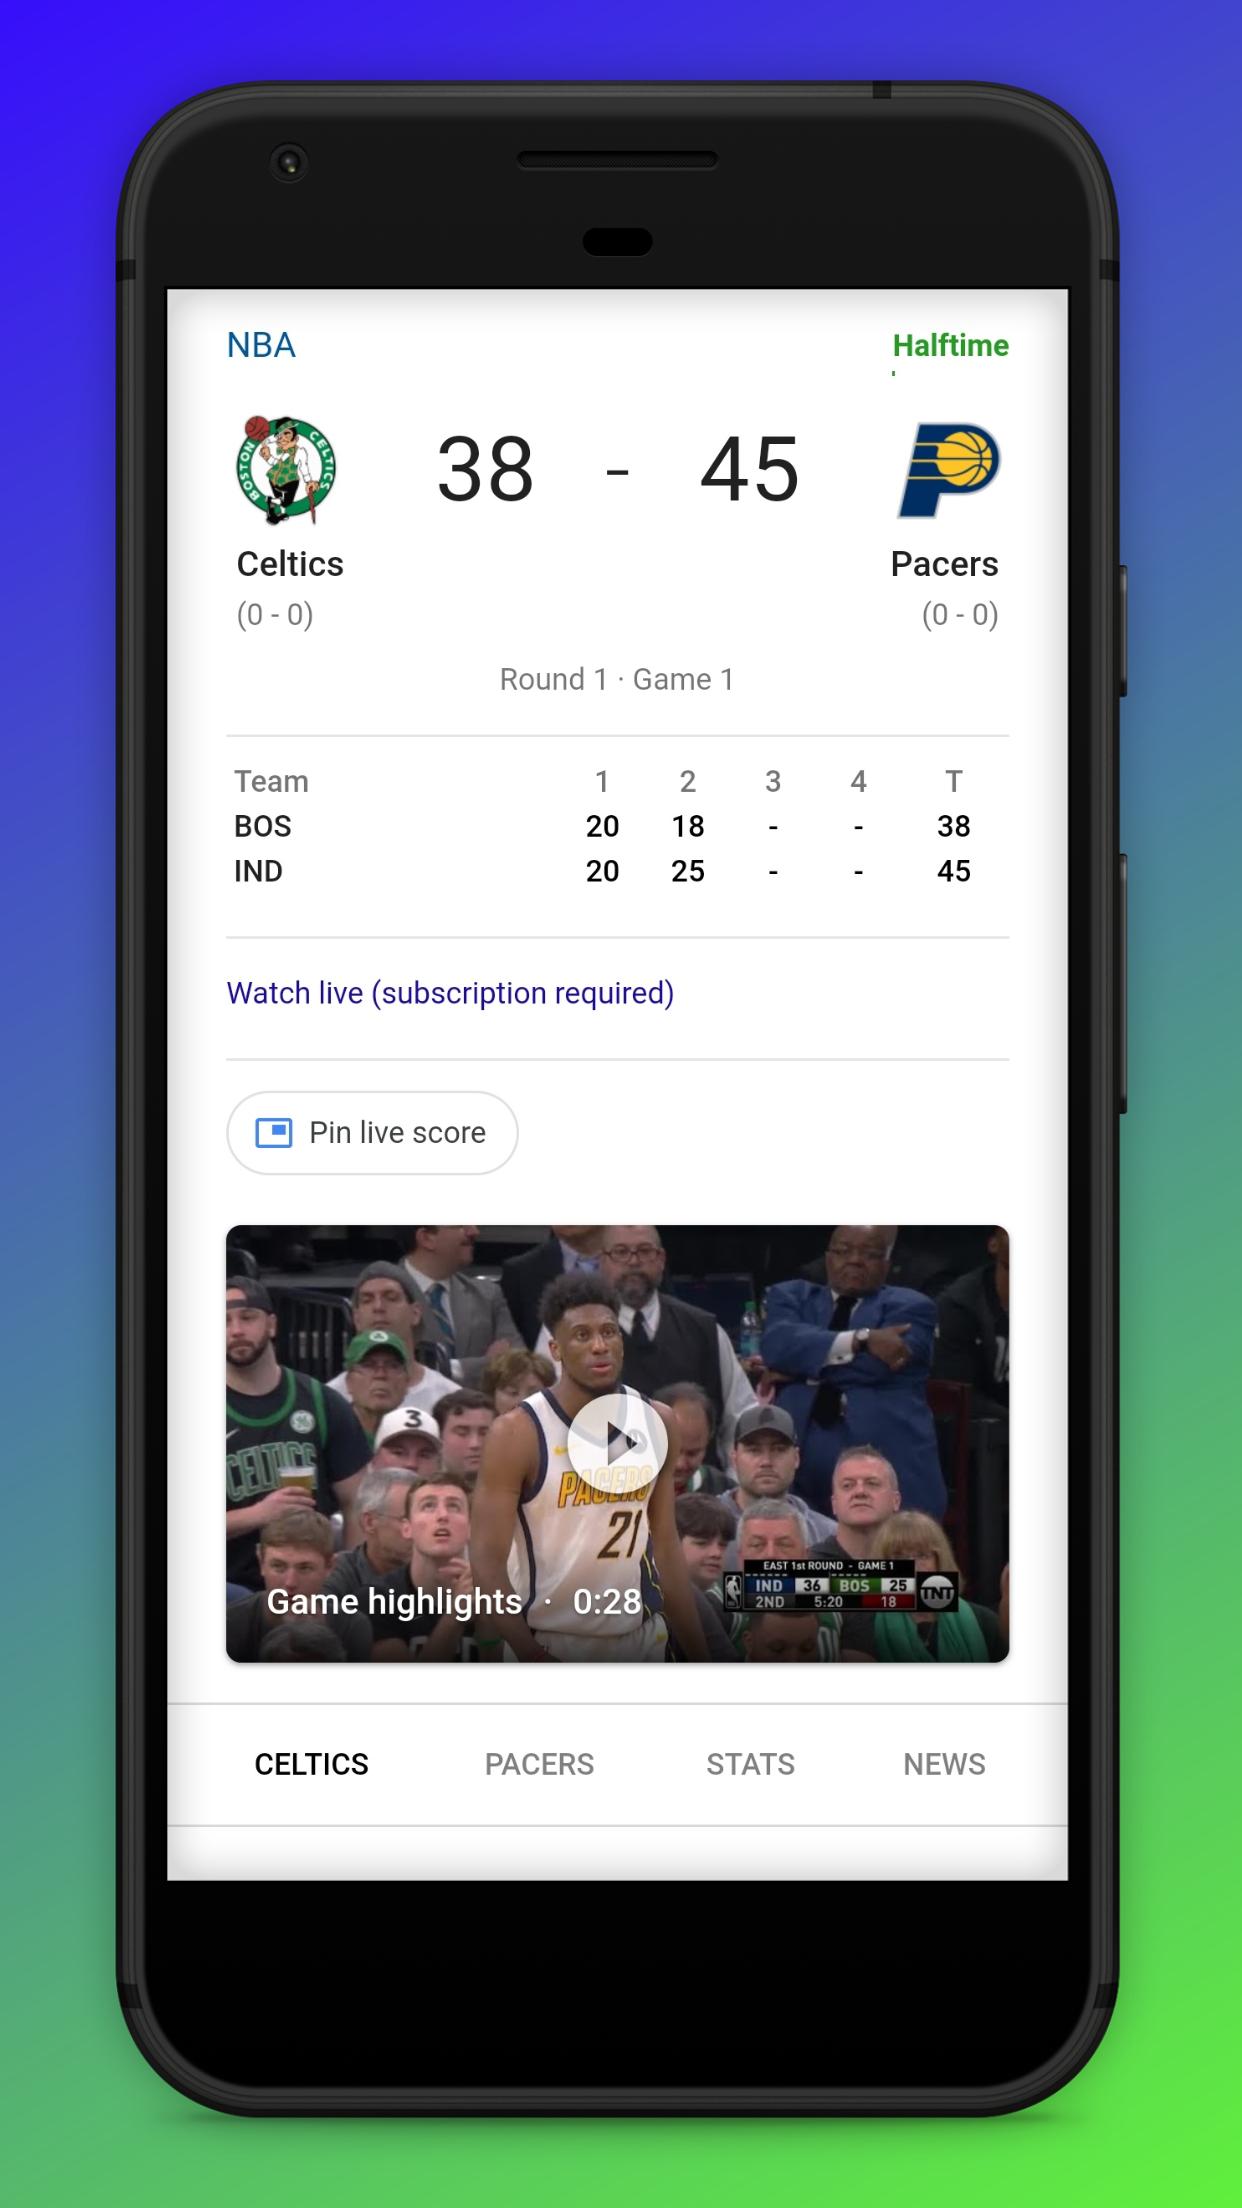 NBA Standings - Basketball Live Scores App for Android - APK Download